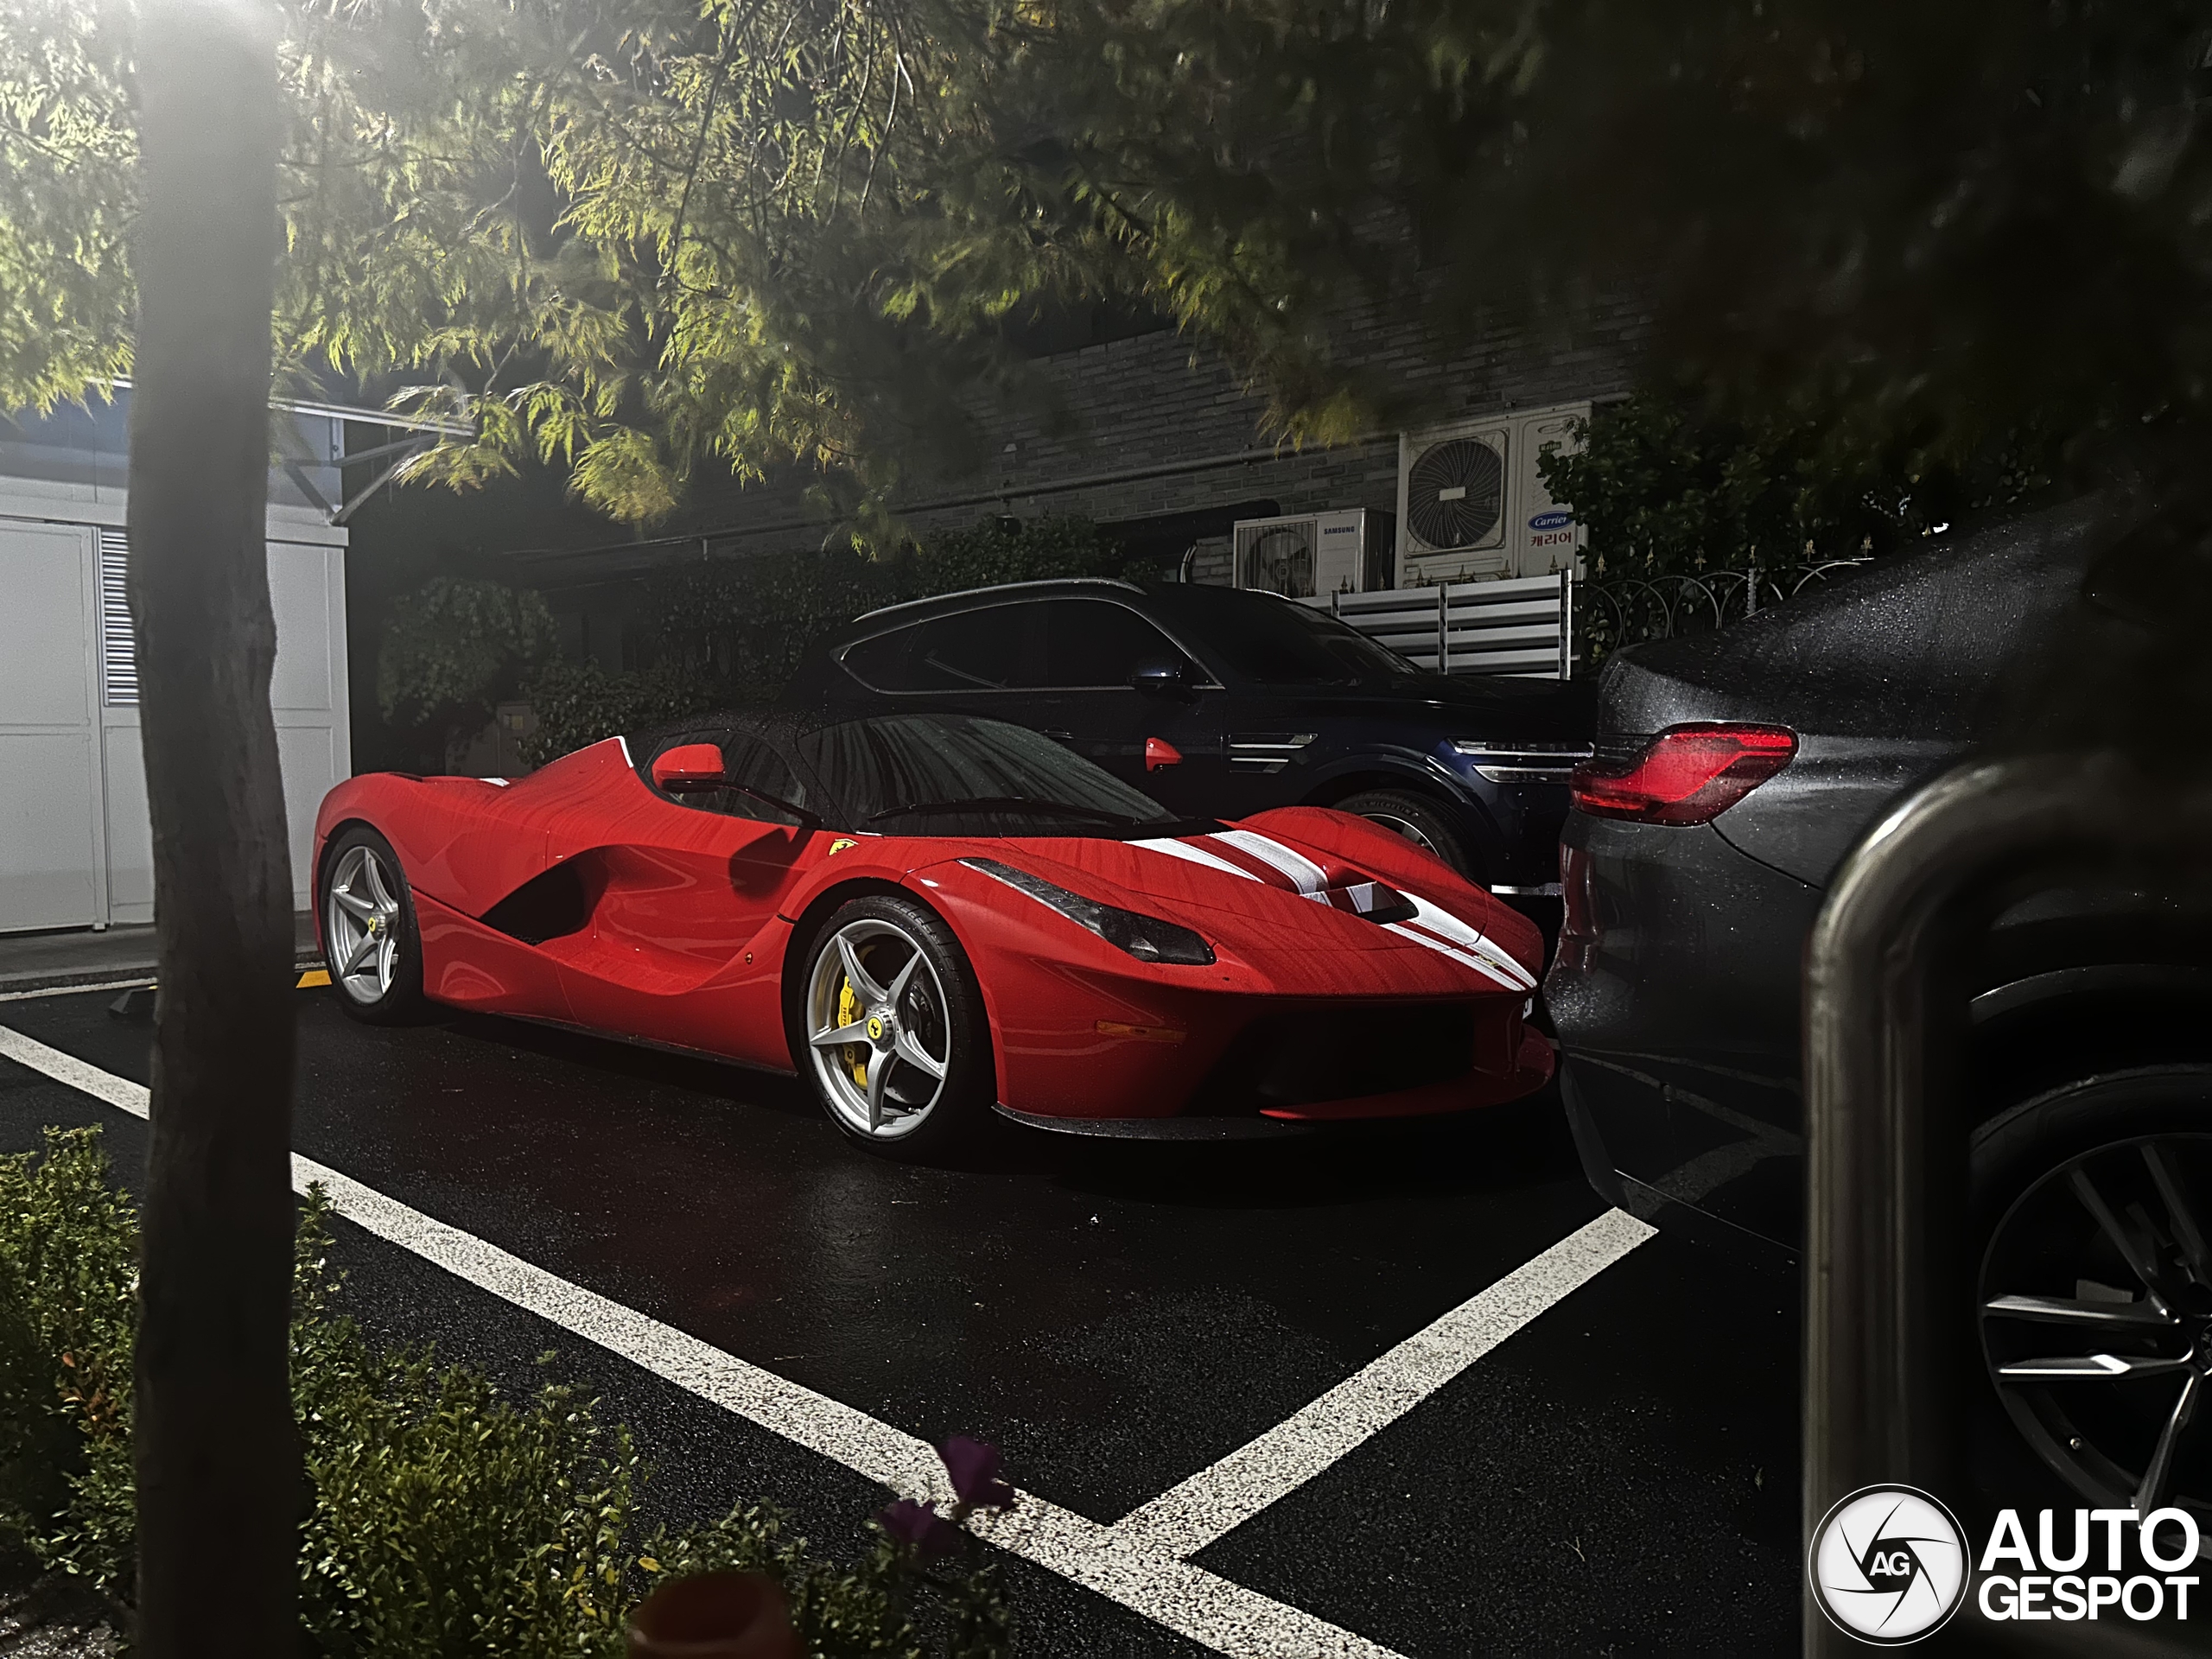 A little detail makes the LaFerrari special